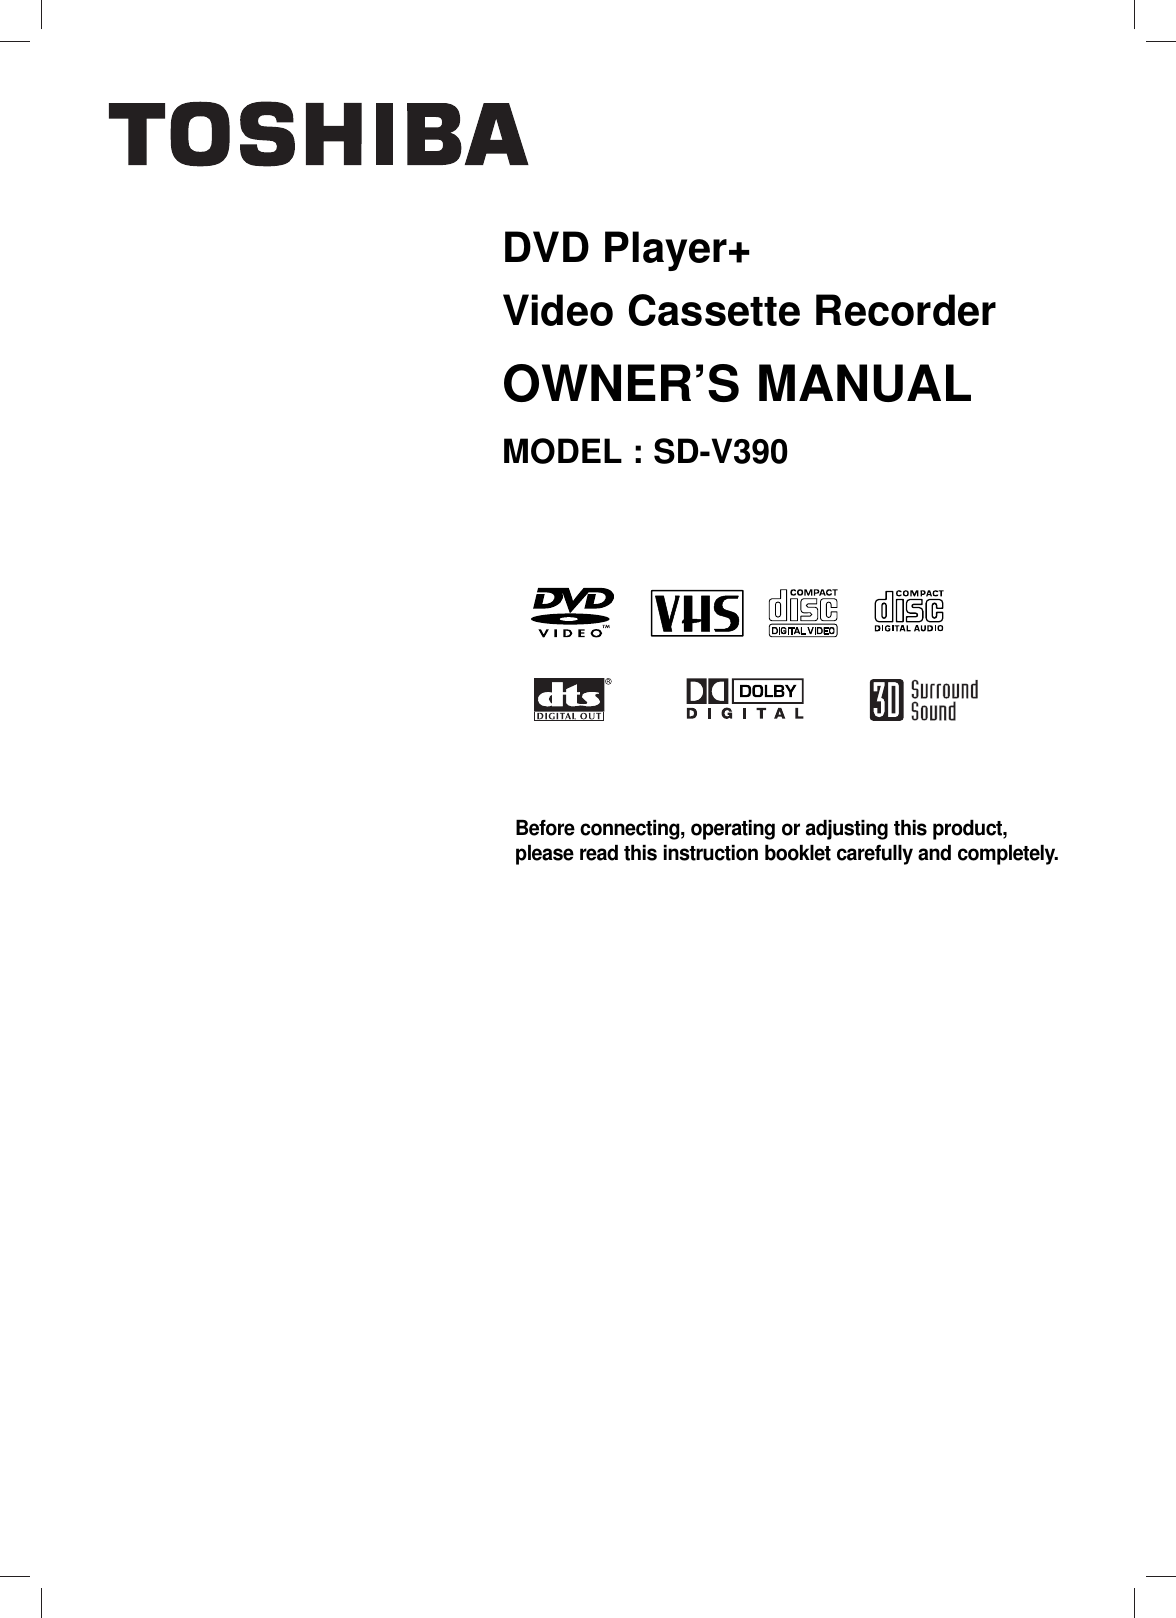 DVD Player+Video Cassette RecorderOWNER’S MANUALMODEL : SD-V390Before connecting, operating or adjusting this product,please read this instruction booklet carefully and completely.